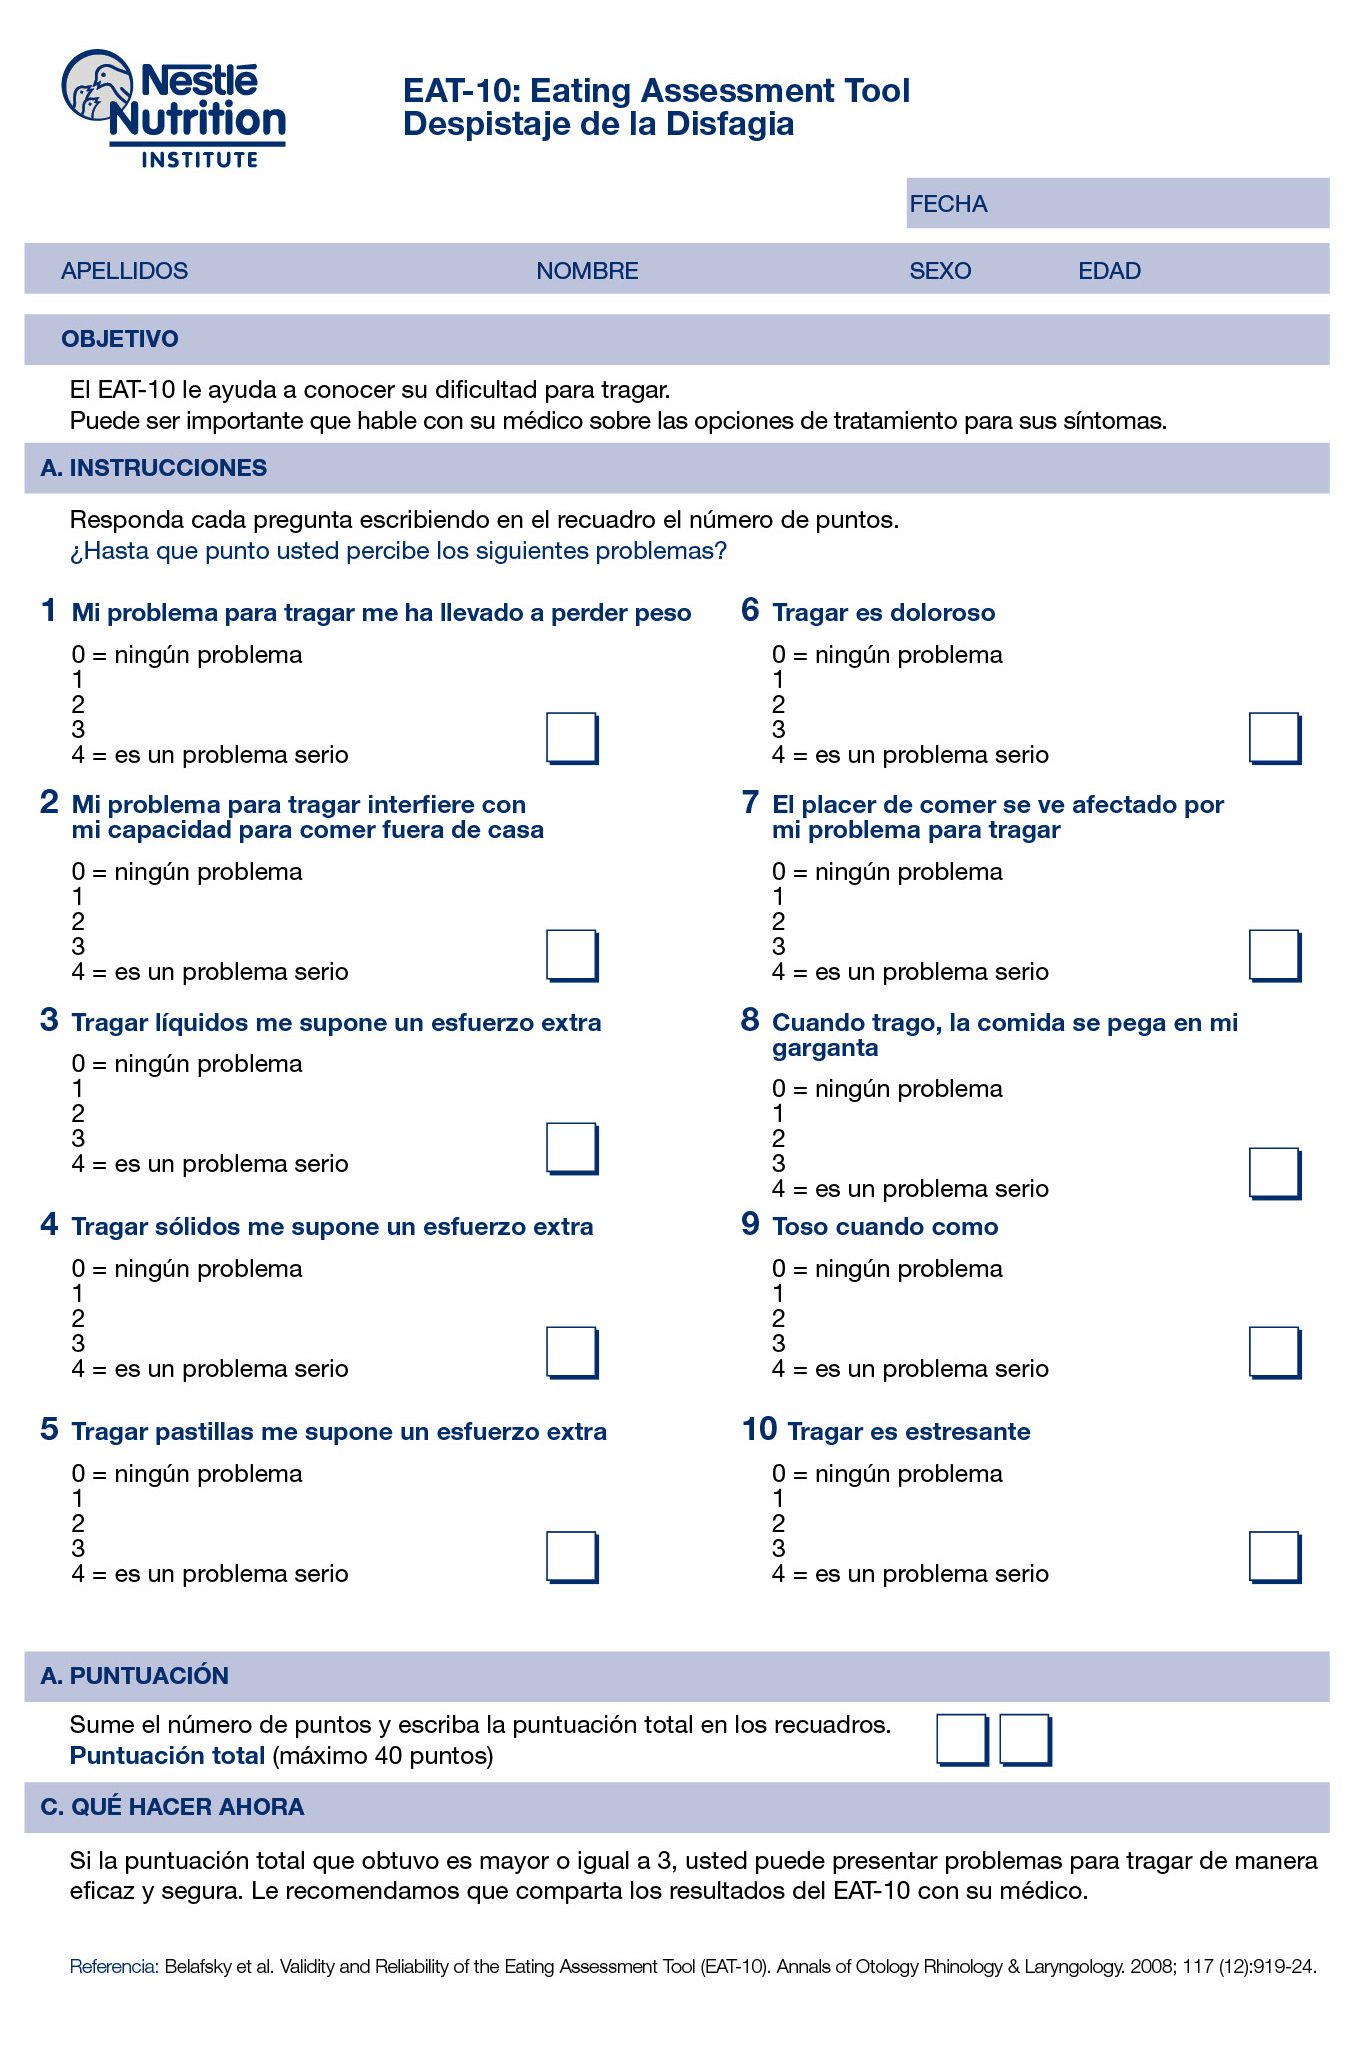 Spanish resources for dysphagia. The EAT-10 is a popular quality of life screening tool for people with dysphagia / swallowing problems / swallowing disorders. This scale measures the impact on their health and life.